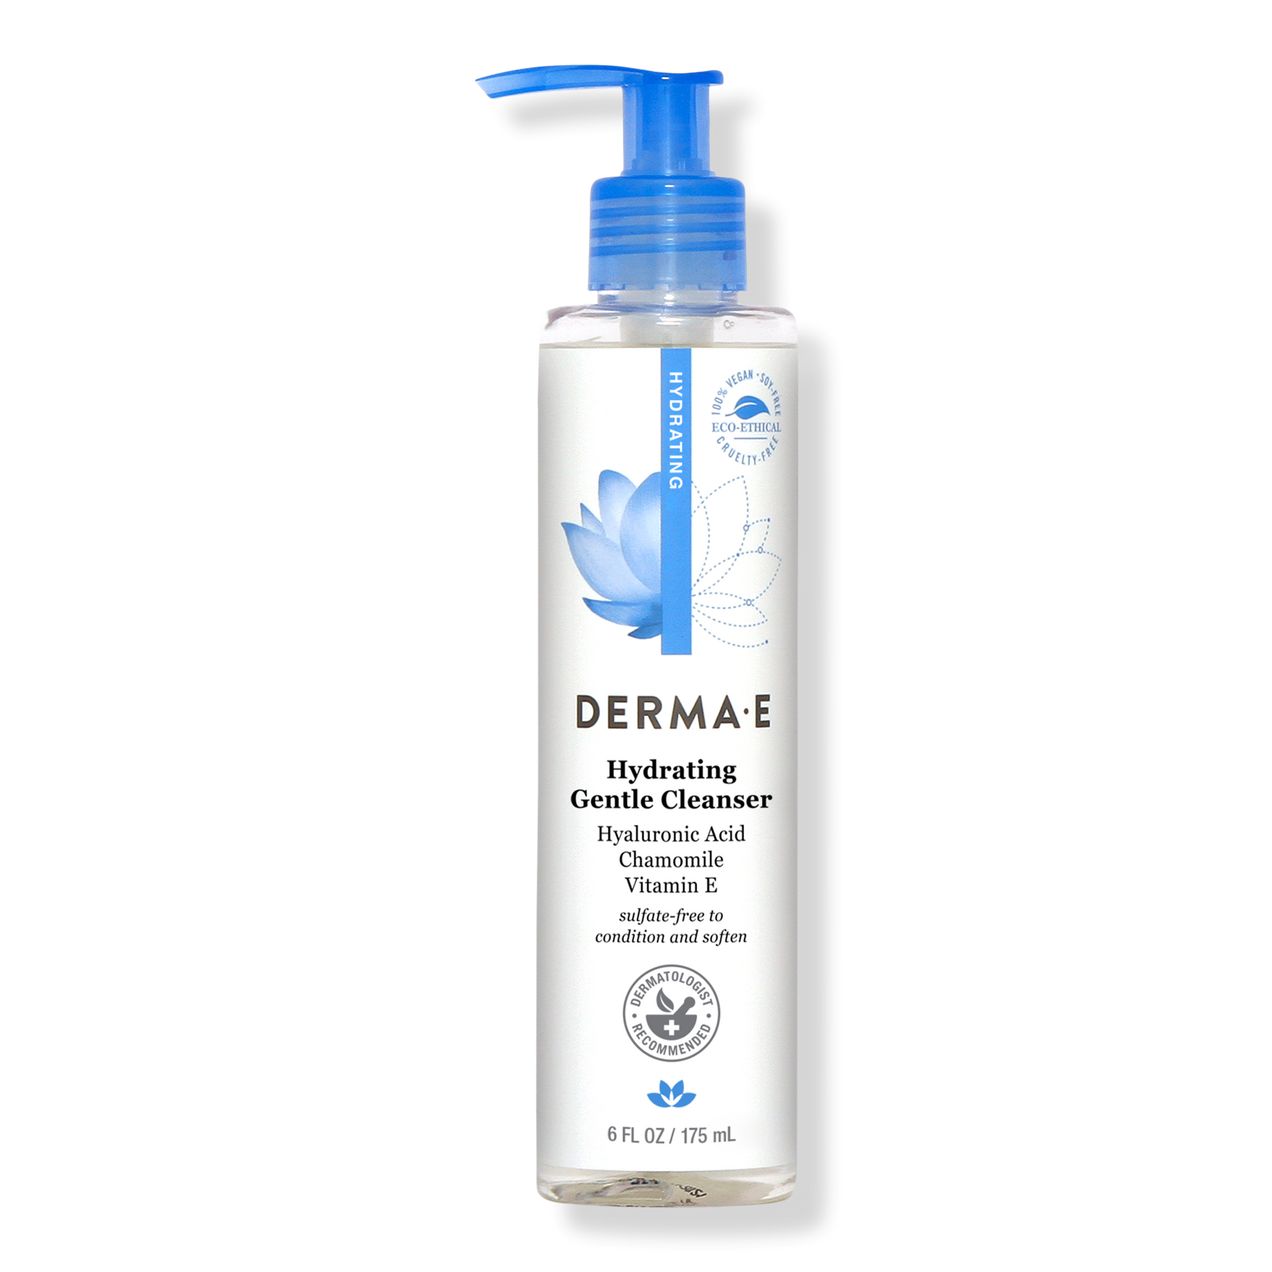 Hydrating Gentle Cleanser with Hyaluronic Acid | Ulta